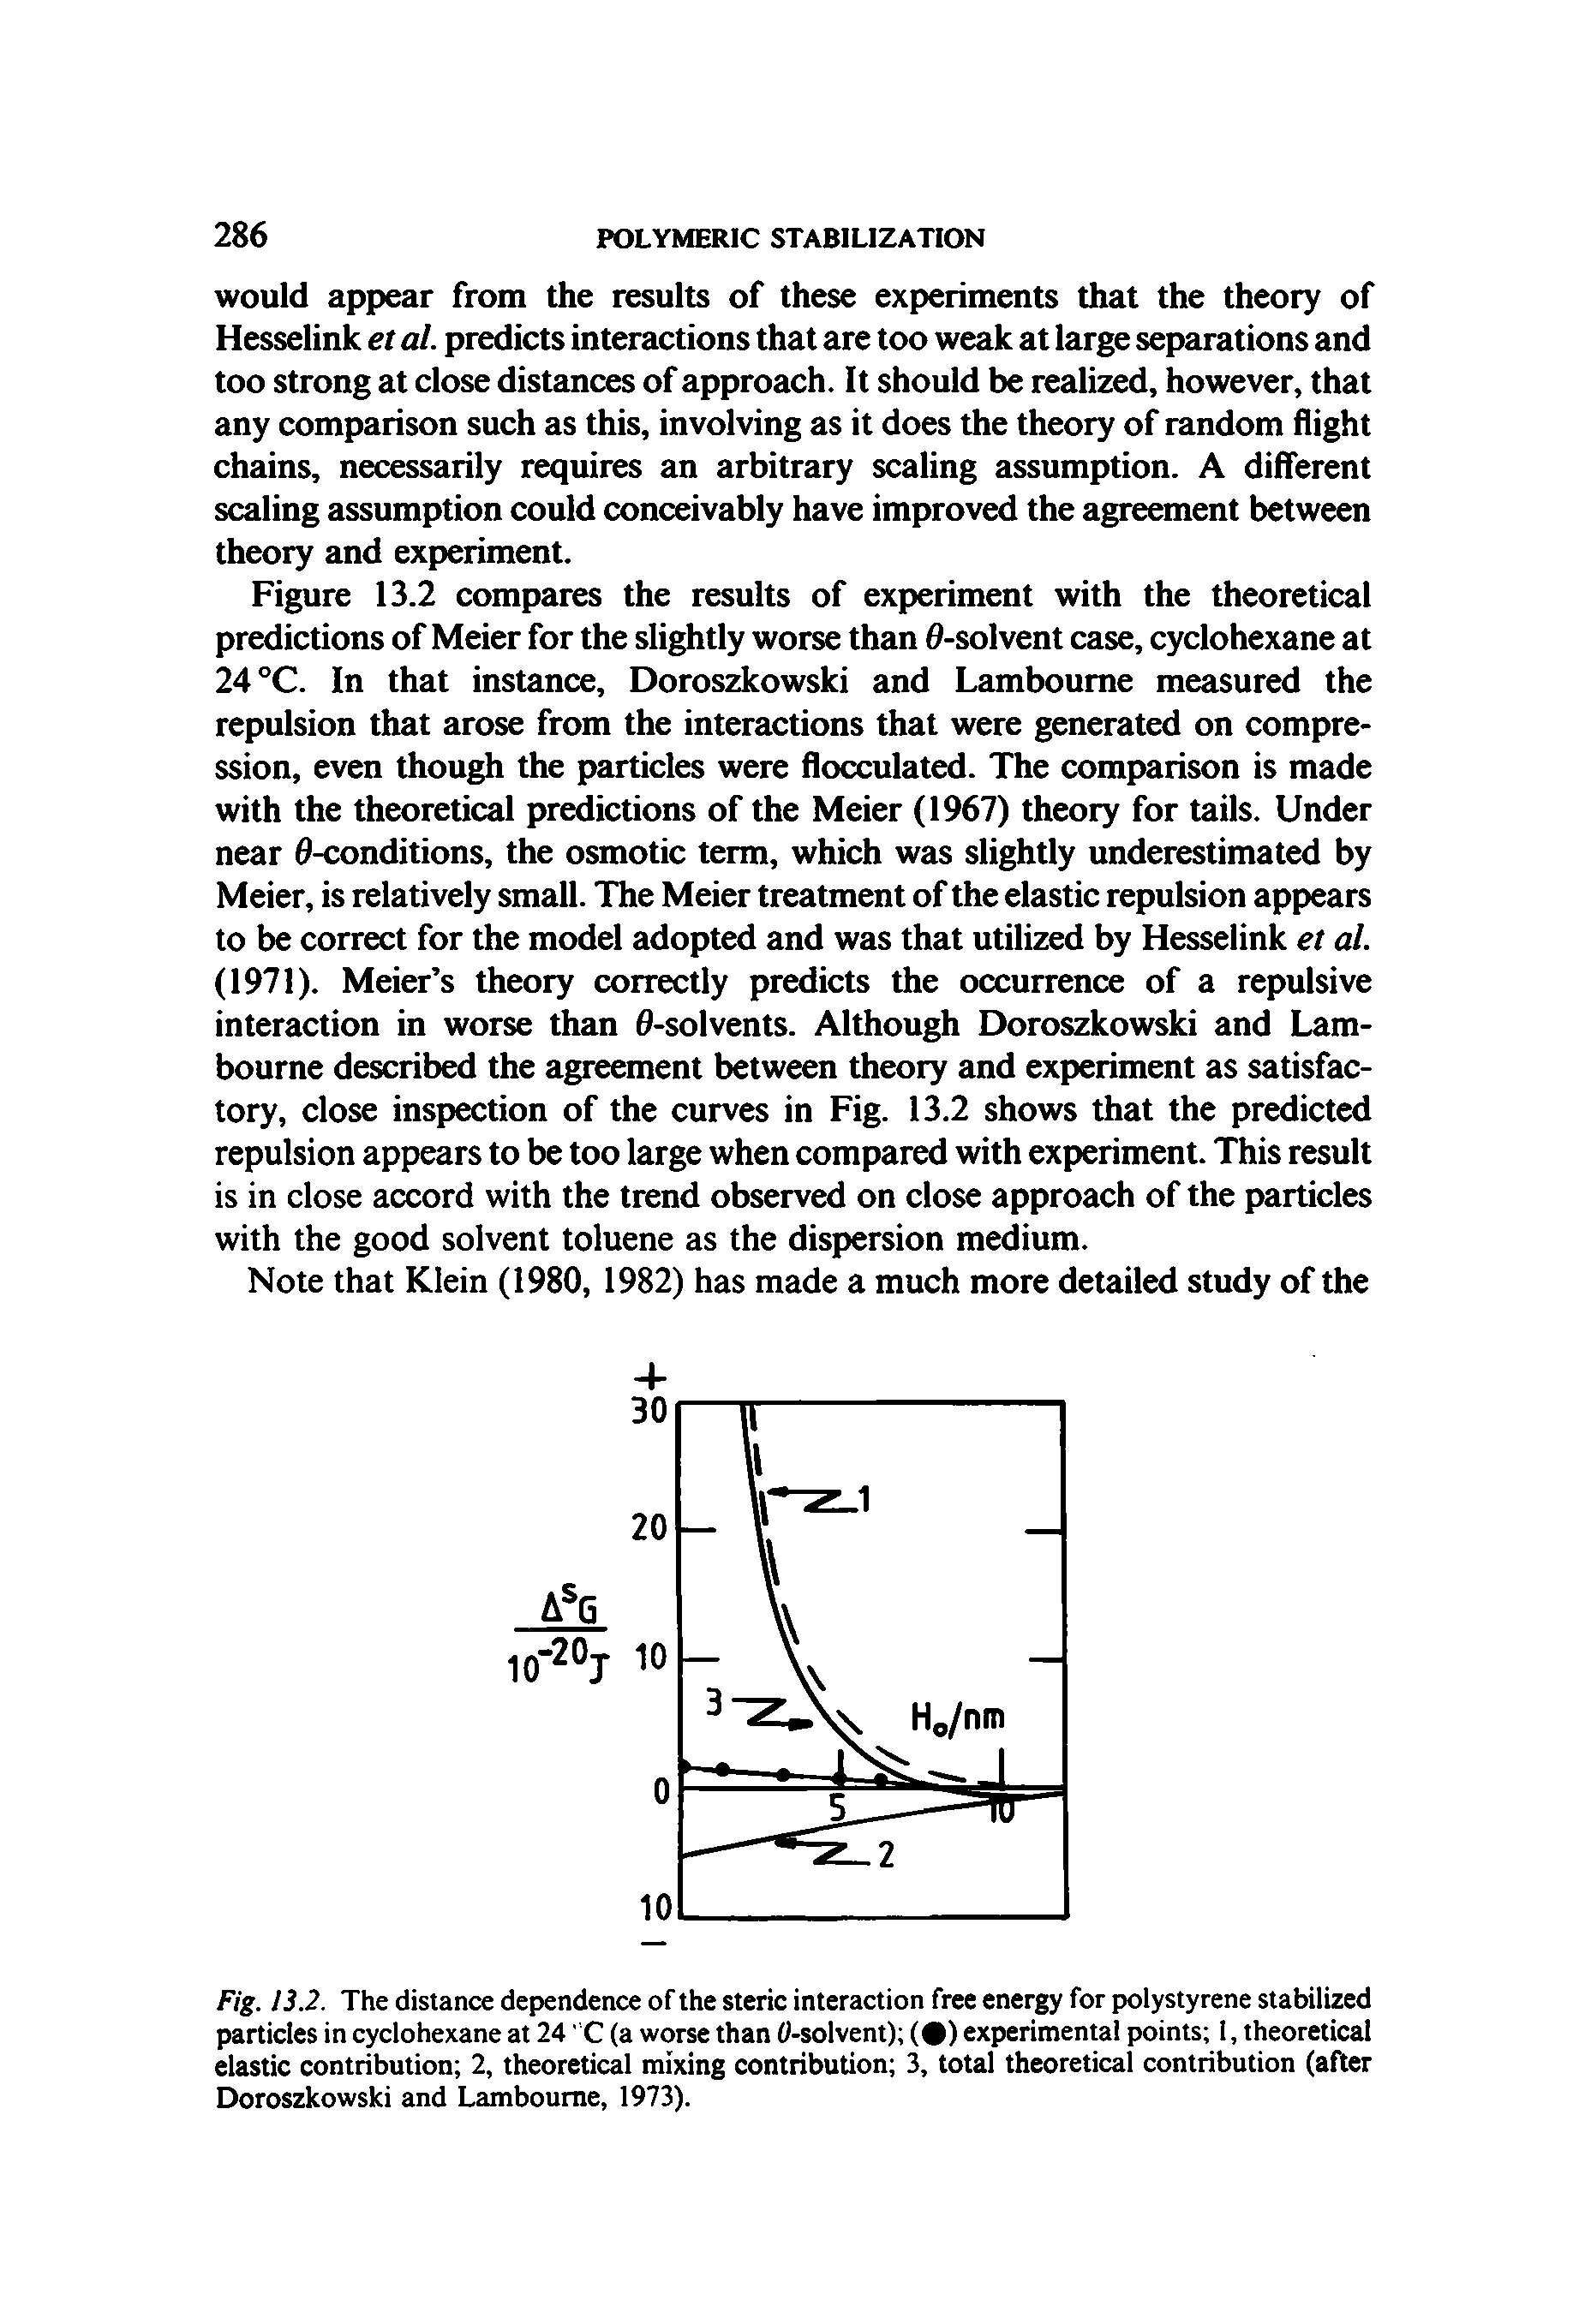 Fig. 13.2. The distance dependence of the steric interaction free energy for polystyrene stabilized particles in cyclohexane at 24 C (a worse than 0-solvent) ( ) experimental points 1, theoretical elastic contribution 2, theoretical mixing contribution 3, total theoretical contribution (after Doroszkowski and Lamboume, 1973).